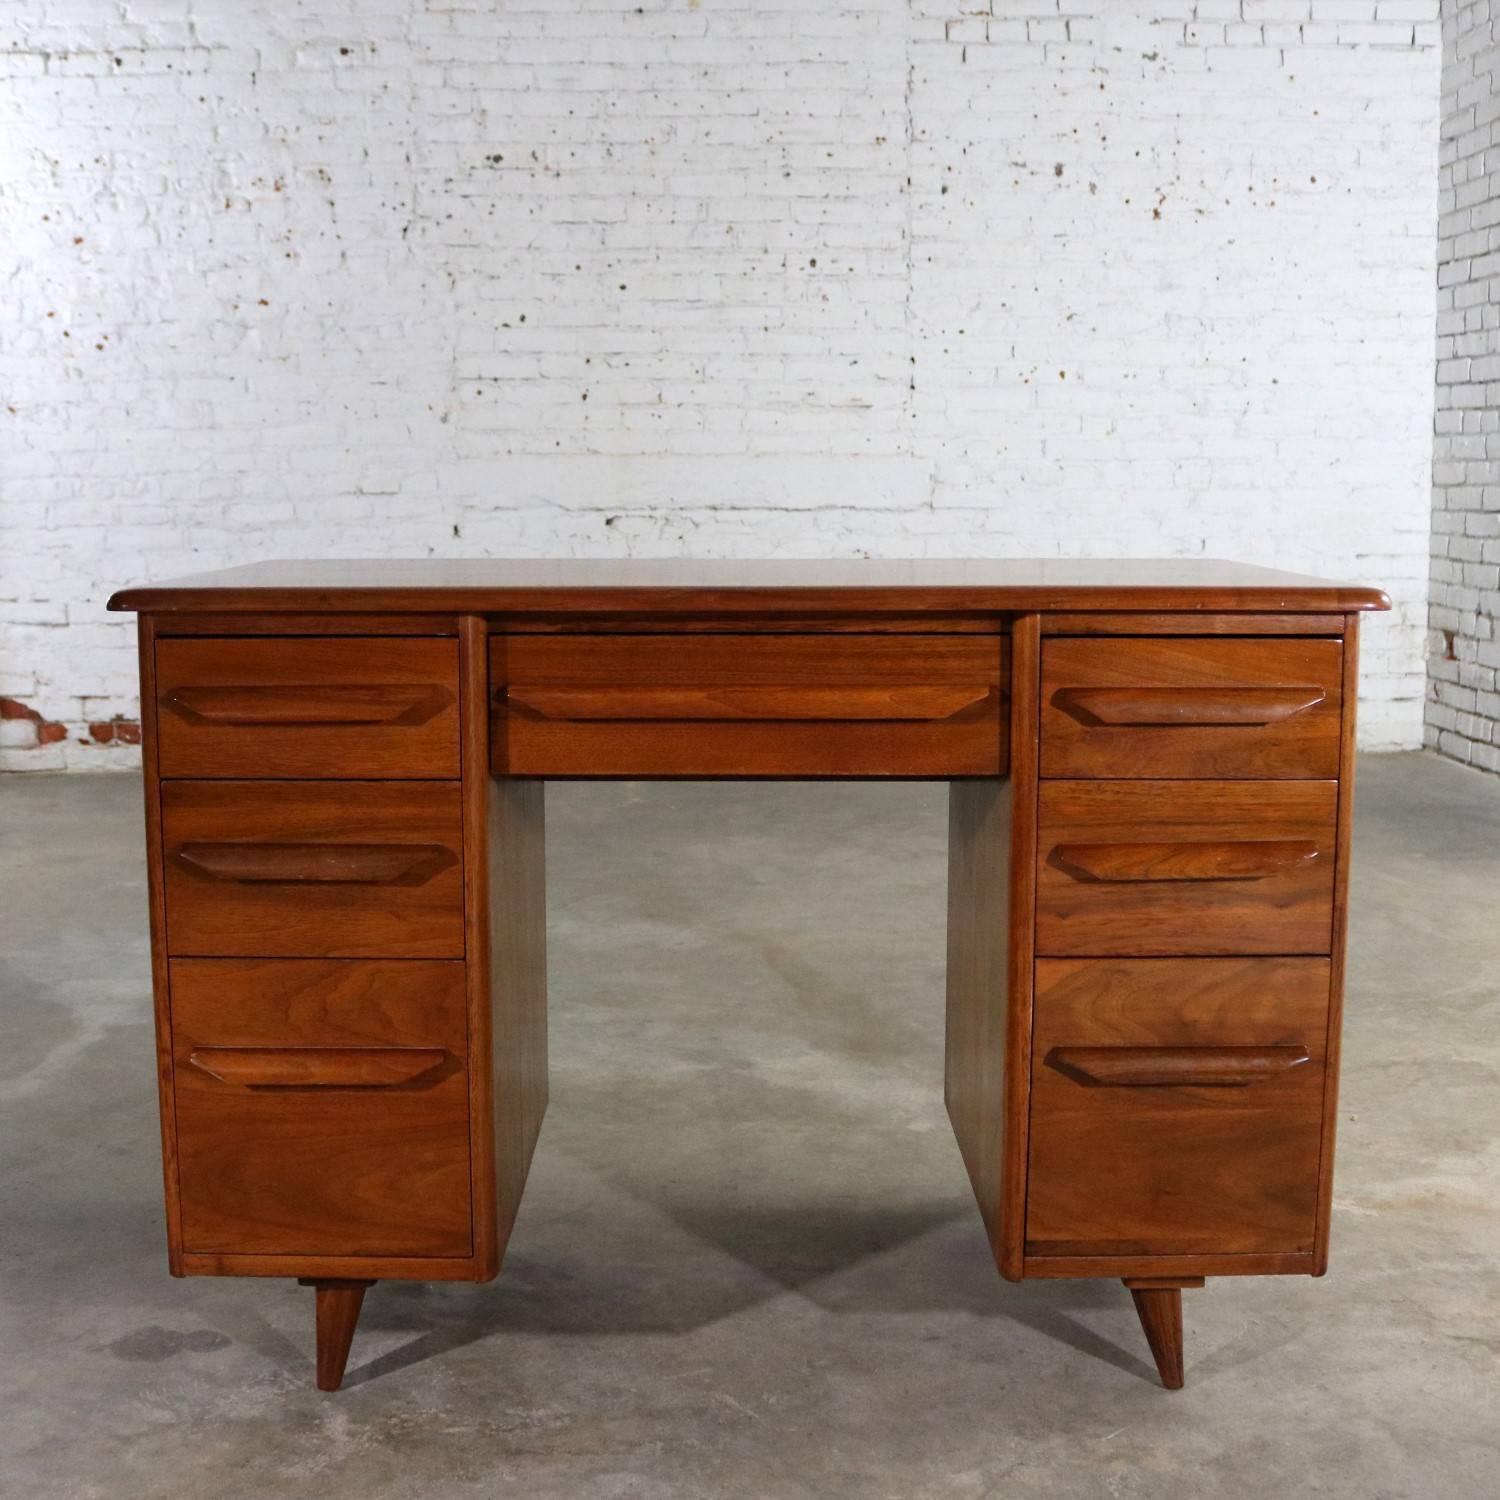 Handsome walnut writing desk in the manner of Carl Bissman’s mid-century modern pieces. It is in wonderful vintage condition with minor wear from age and use. See Photos. Circa 1950s.

An exceptionally beautiful mid-century modern writing desk done